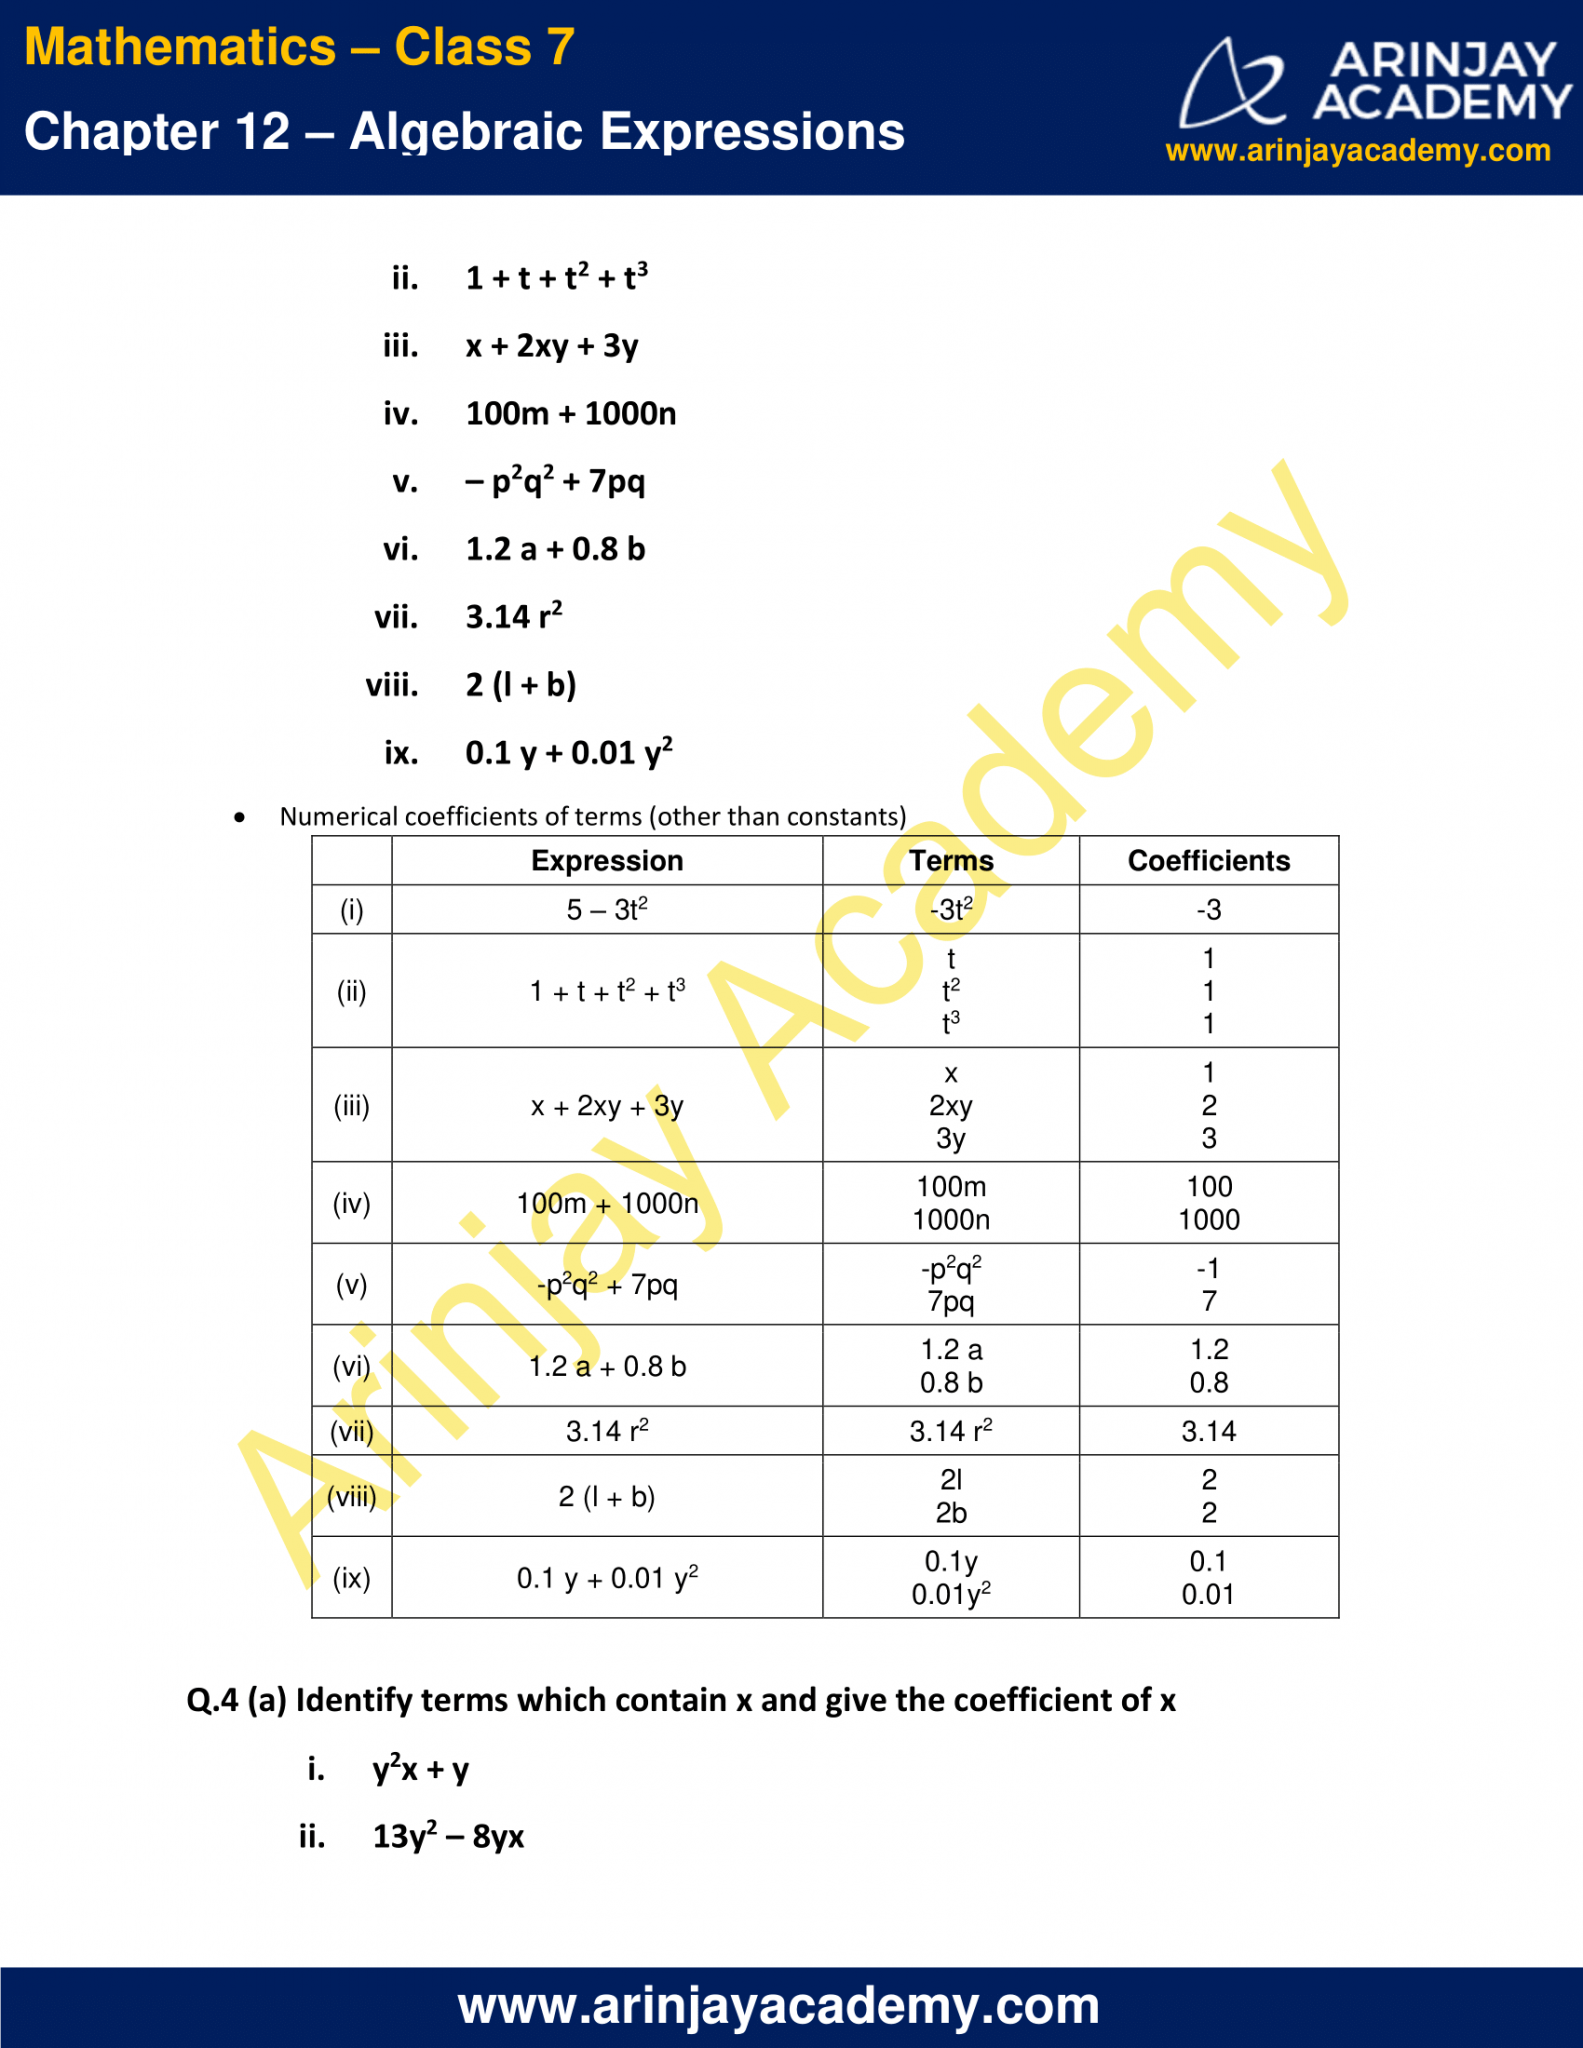 ncert-solutions-for-class-7-maths-chapter-12-algebraic-expressions